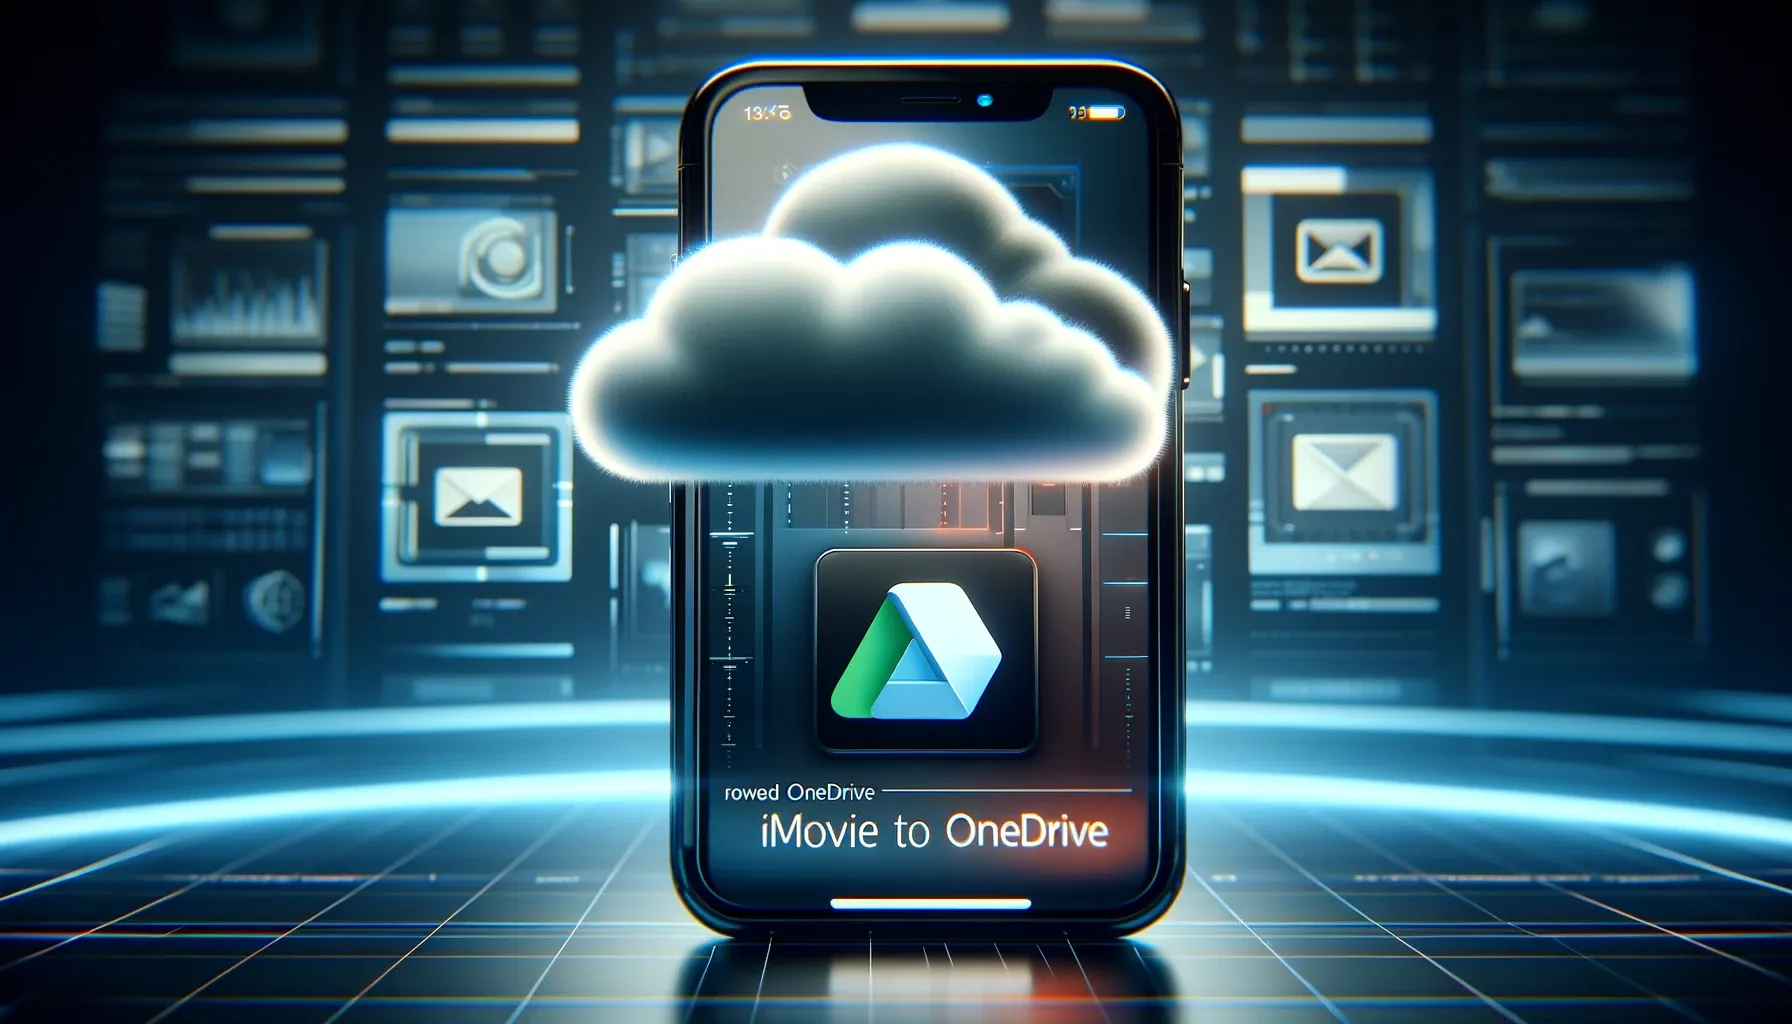 How to Backup iMovie Videos to OneDrive on iPhone?